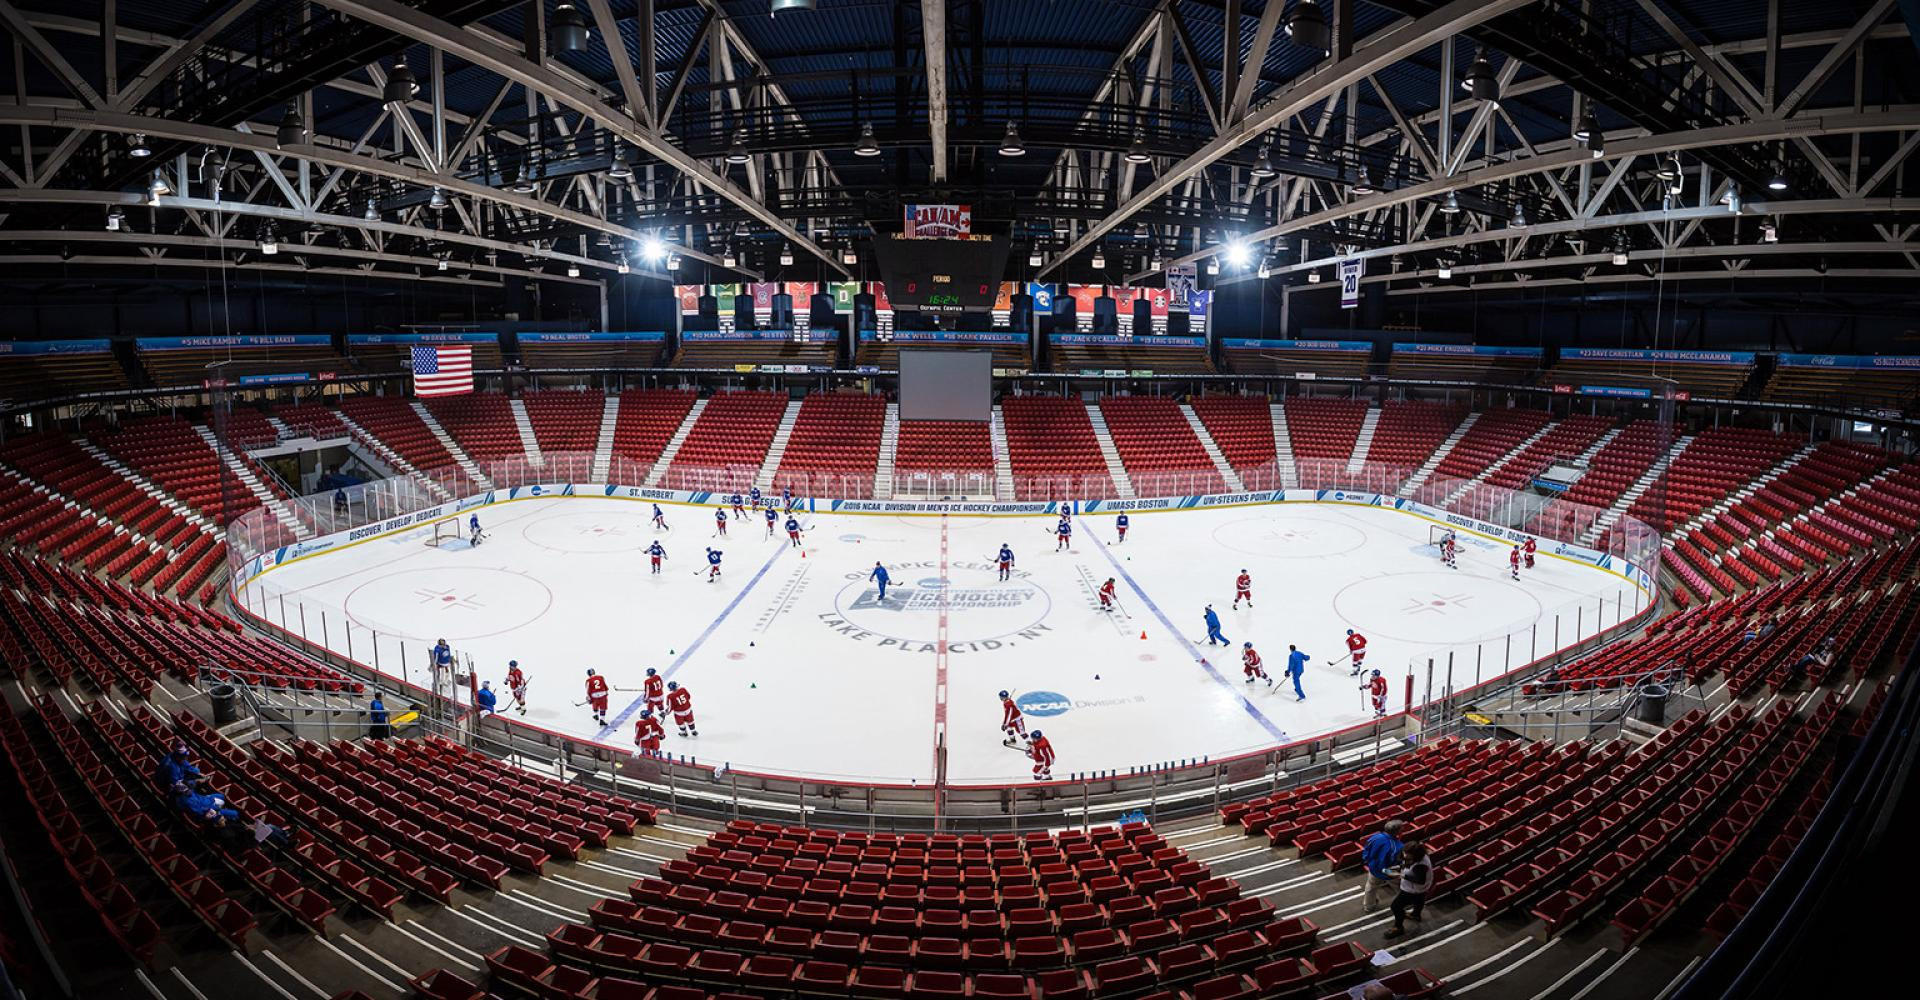 The NWHL season will take place at the Rink-Herb Brooks Arena in Lake Placid ©Lake Placid